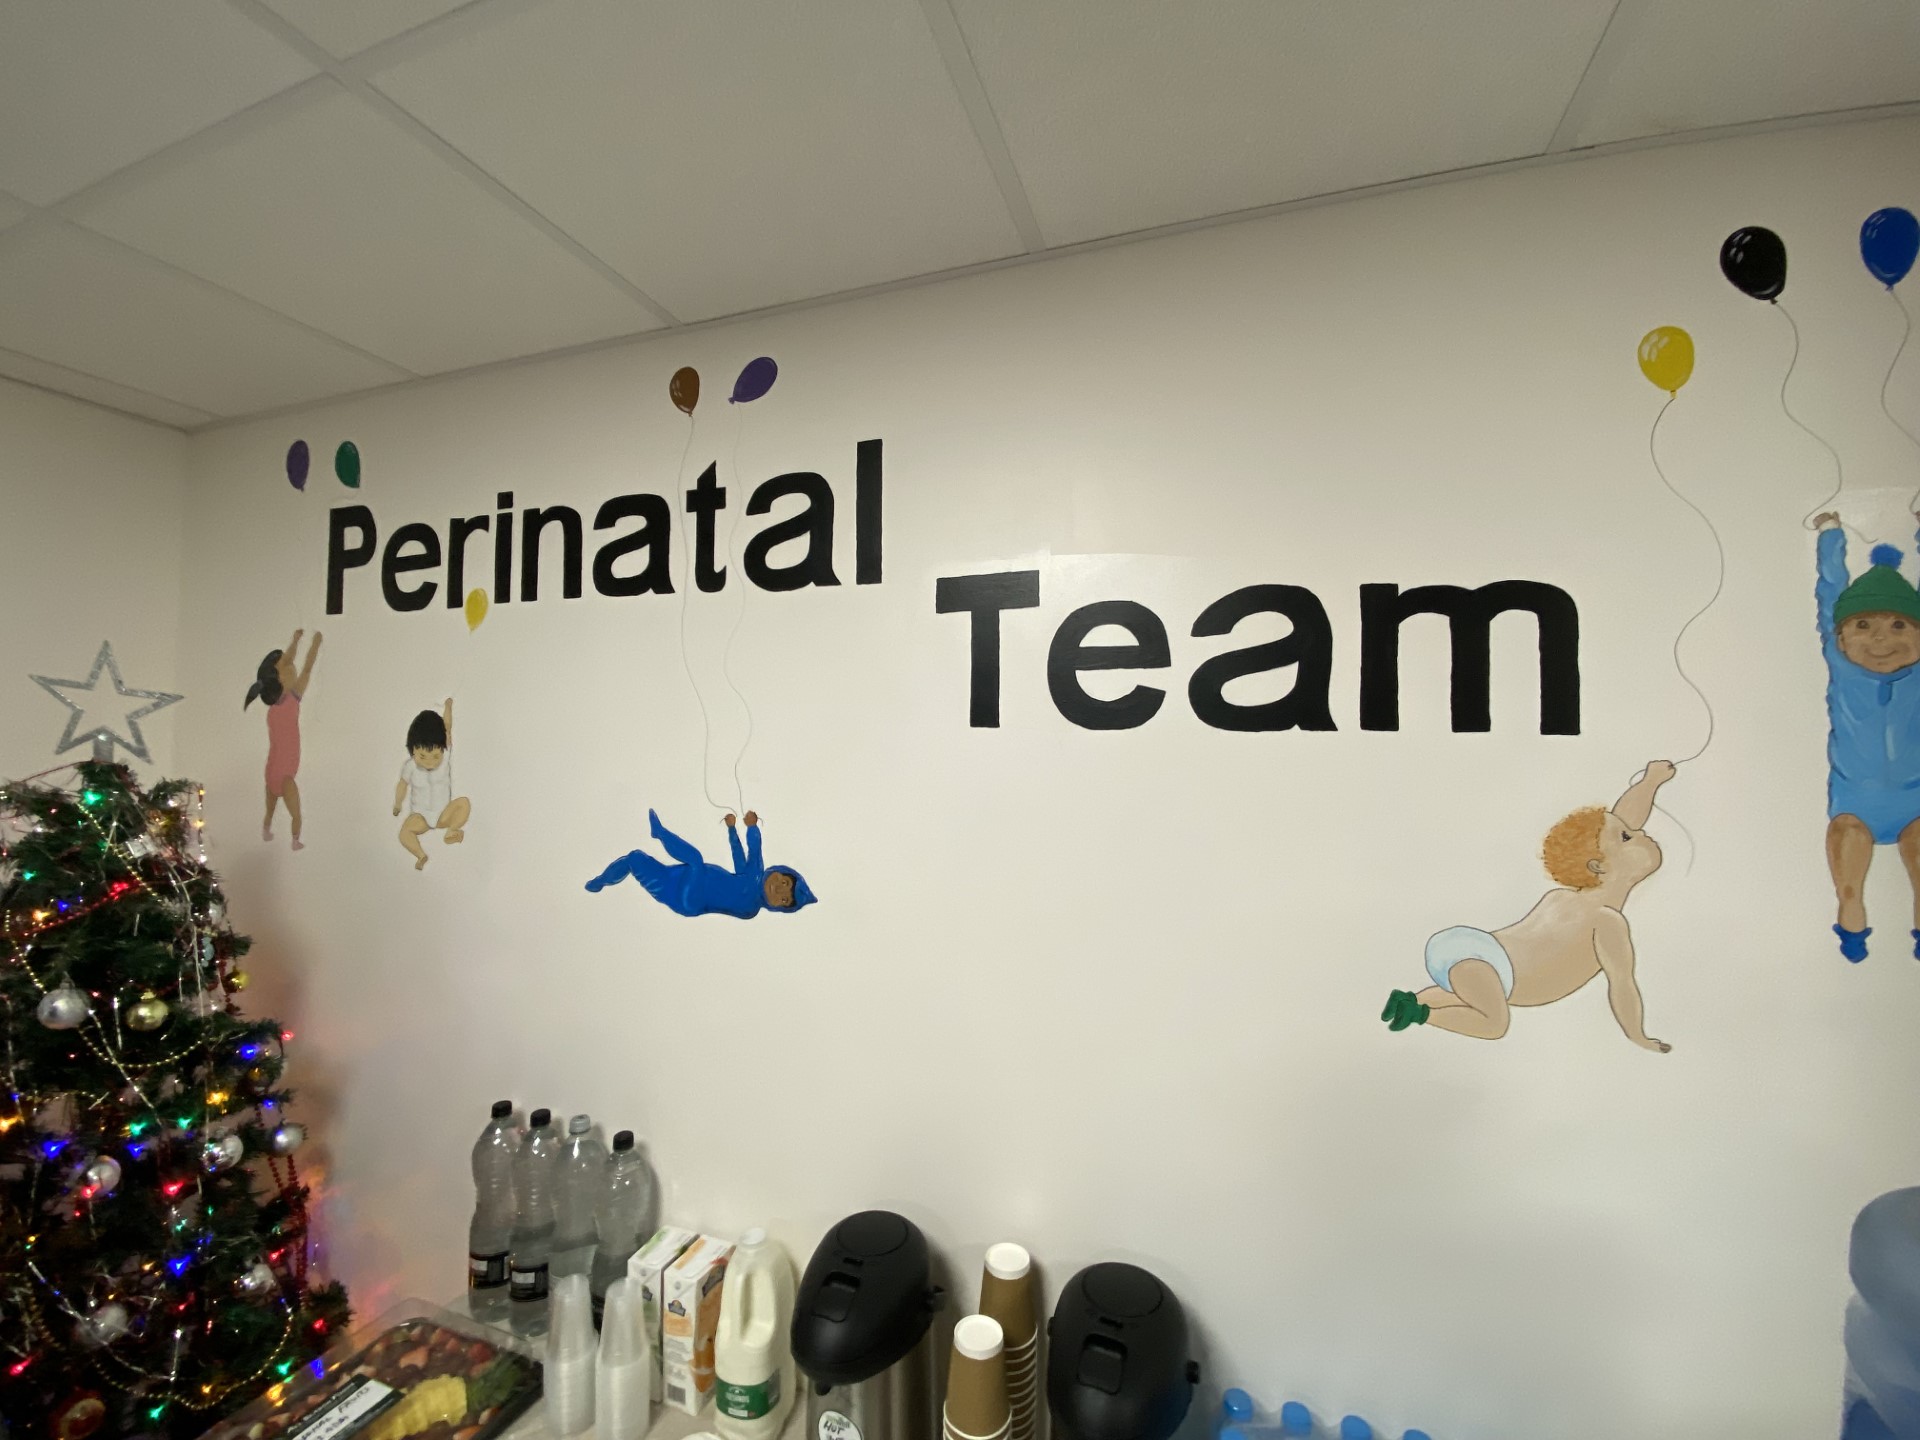 Background of the wall at the Perinatal Service